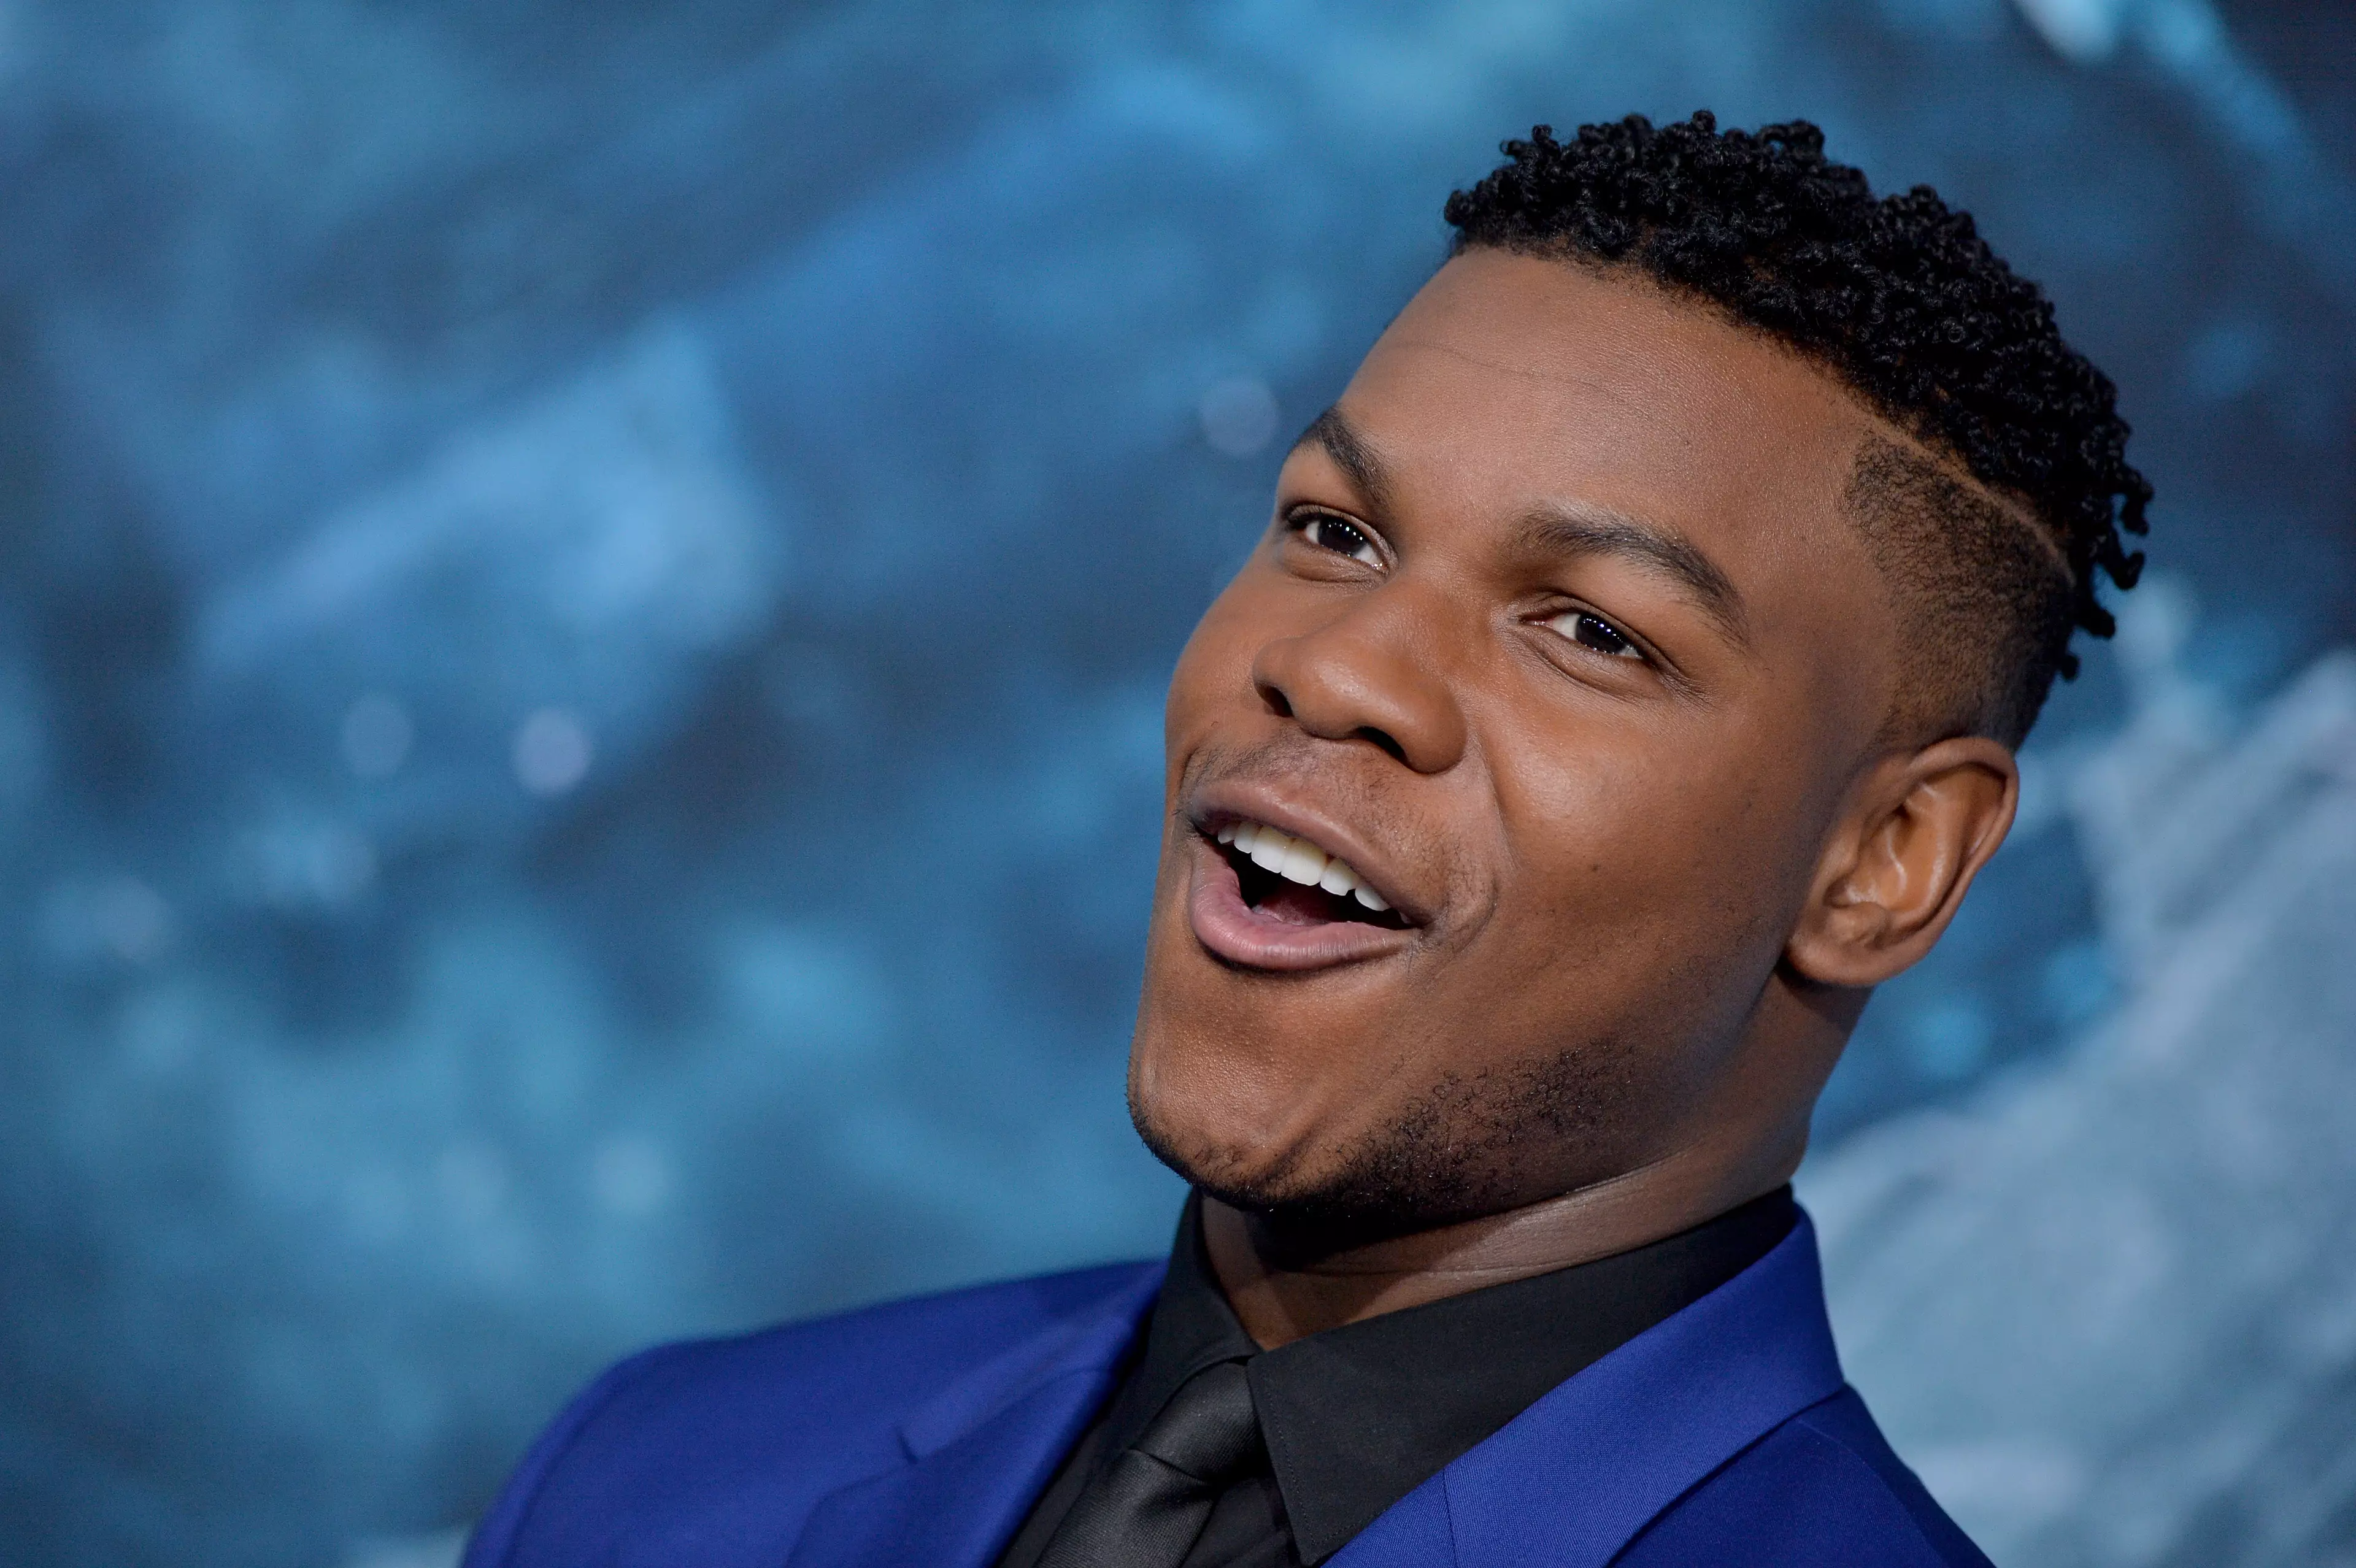 John Boyega might not have been smiling had the script gone viral.